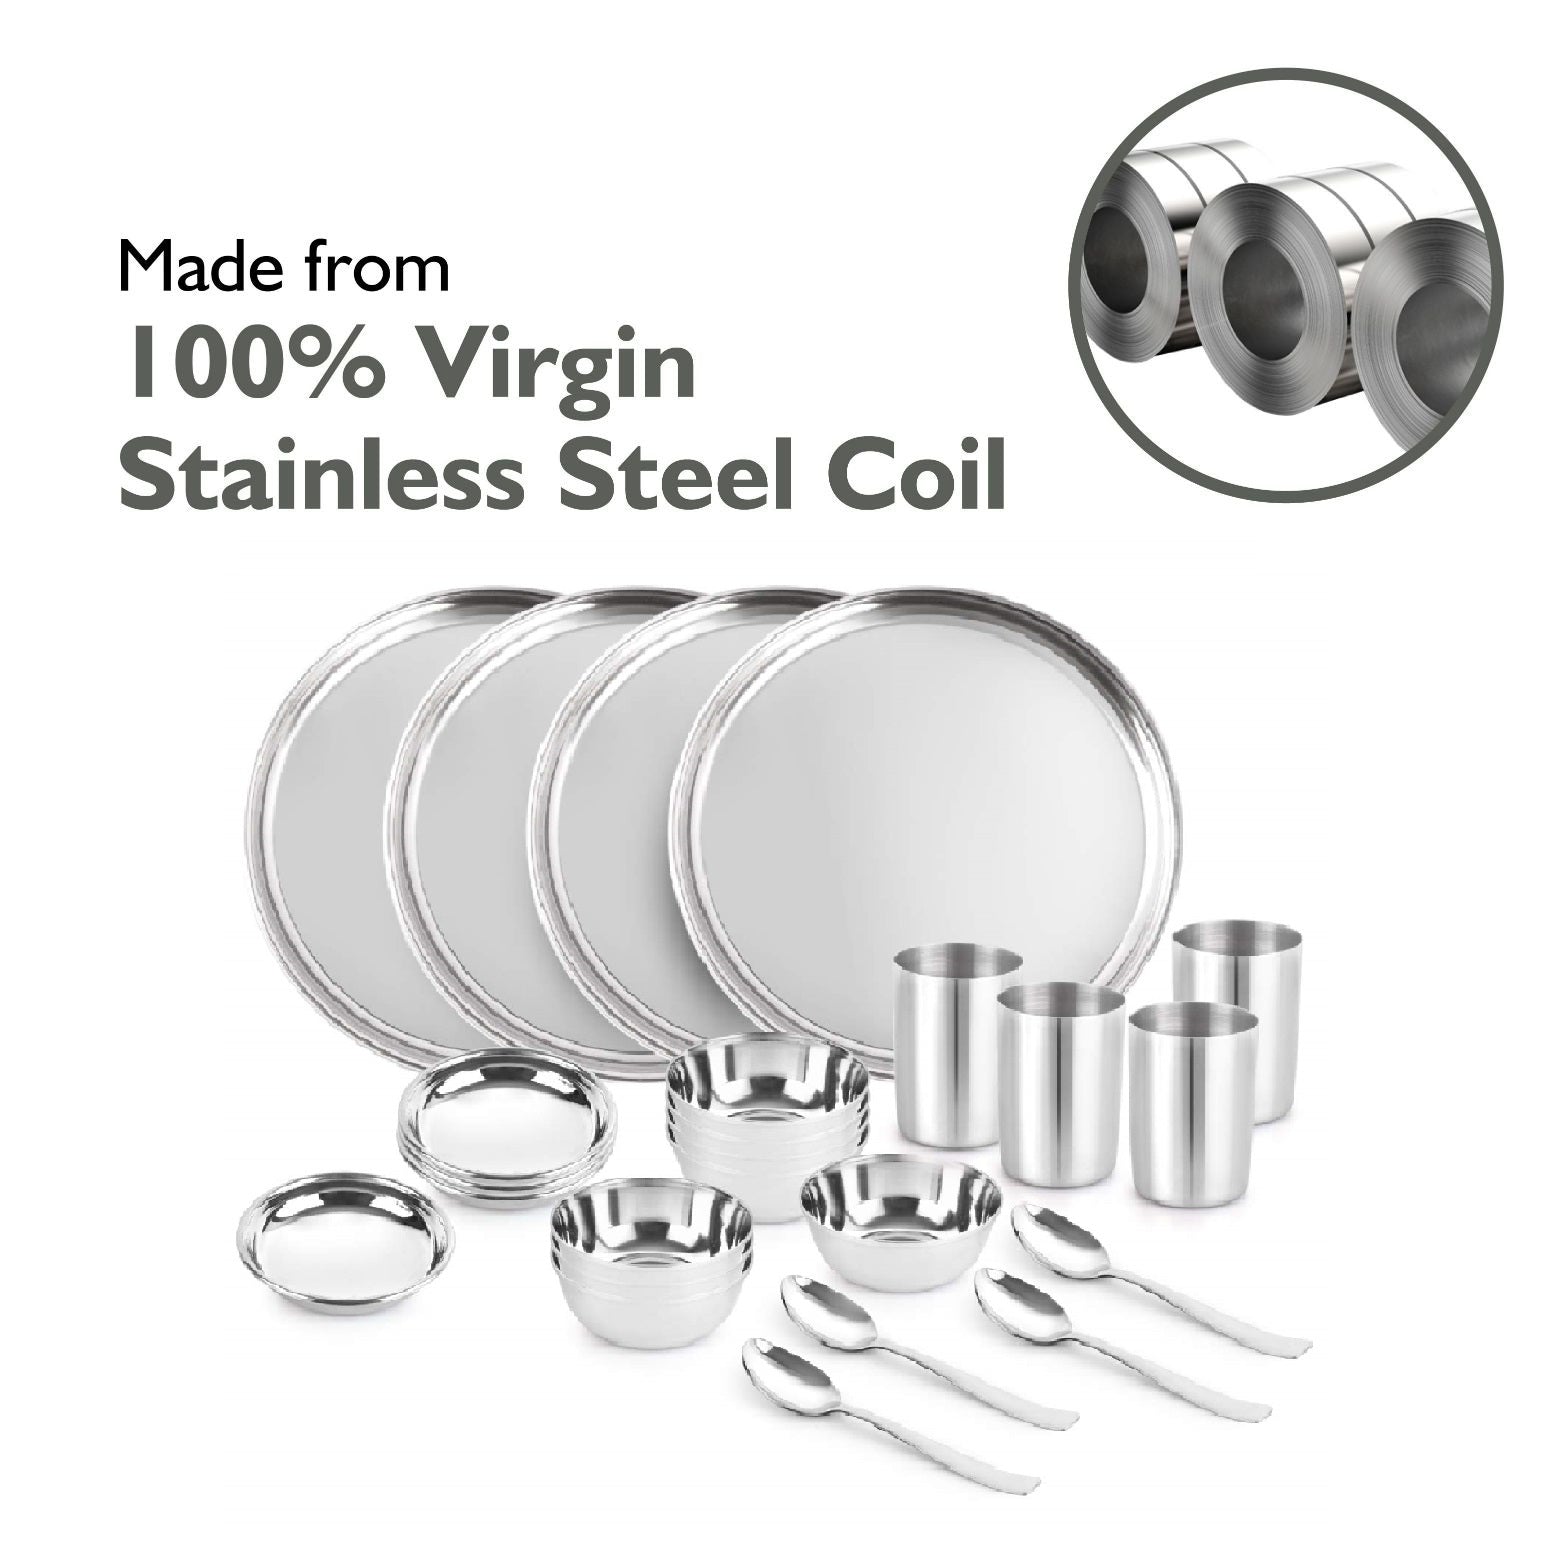 A durable 24-piece stainless steel dinner set for a family of 4